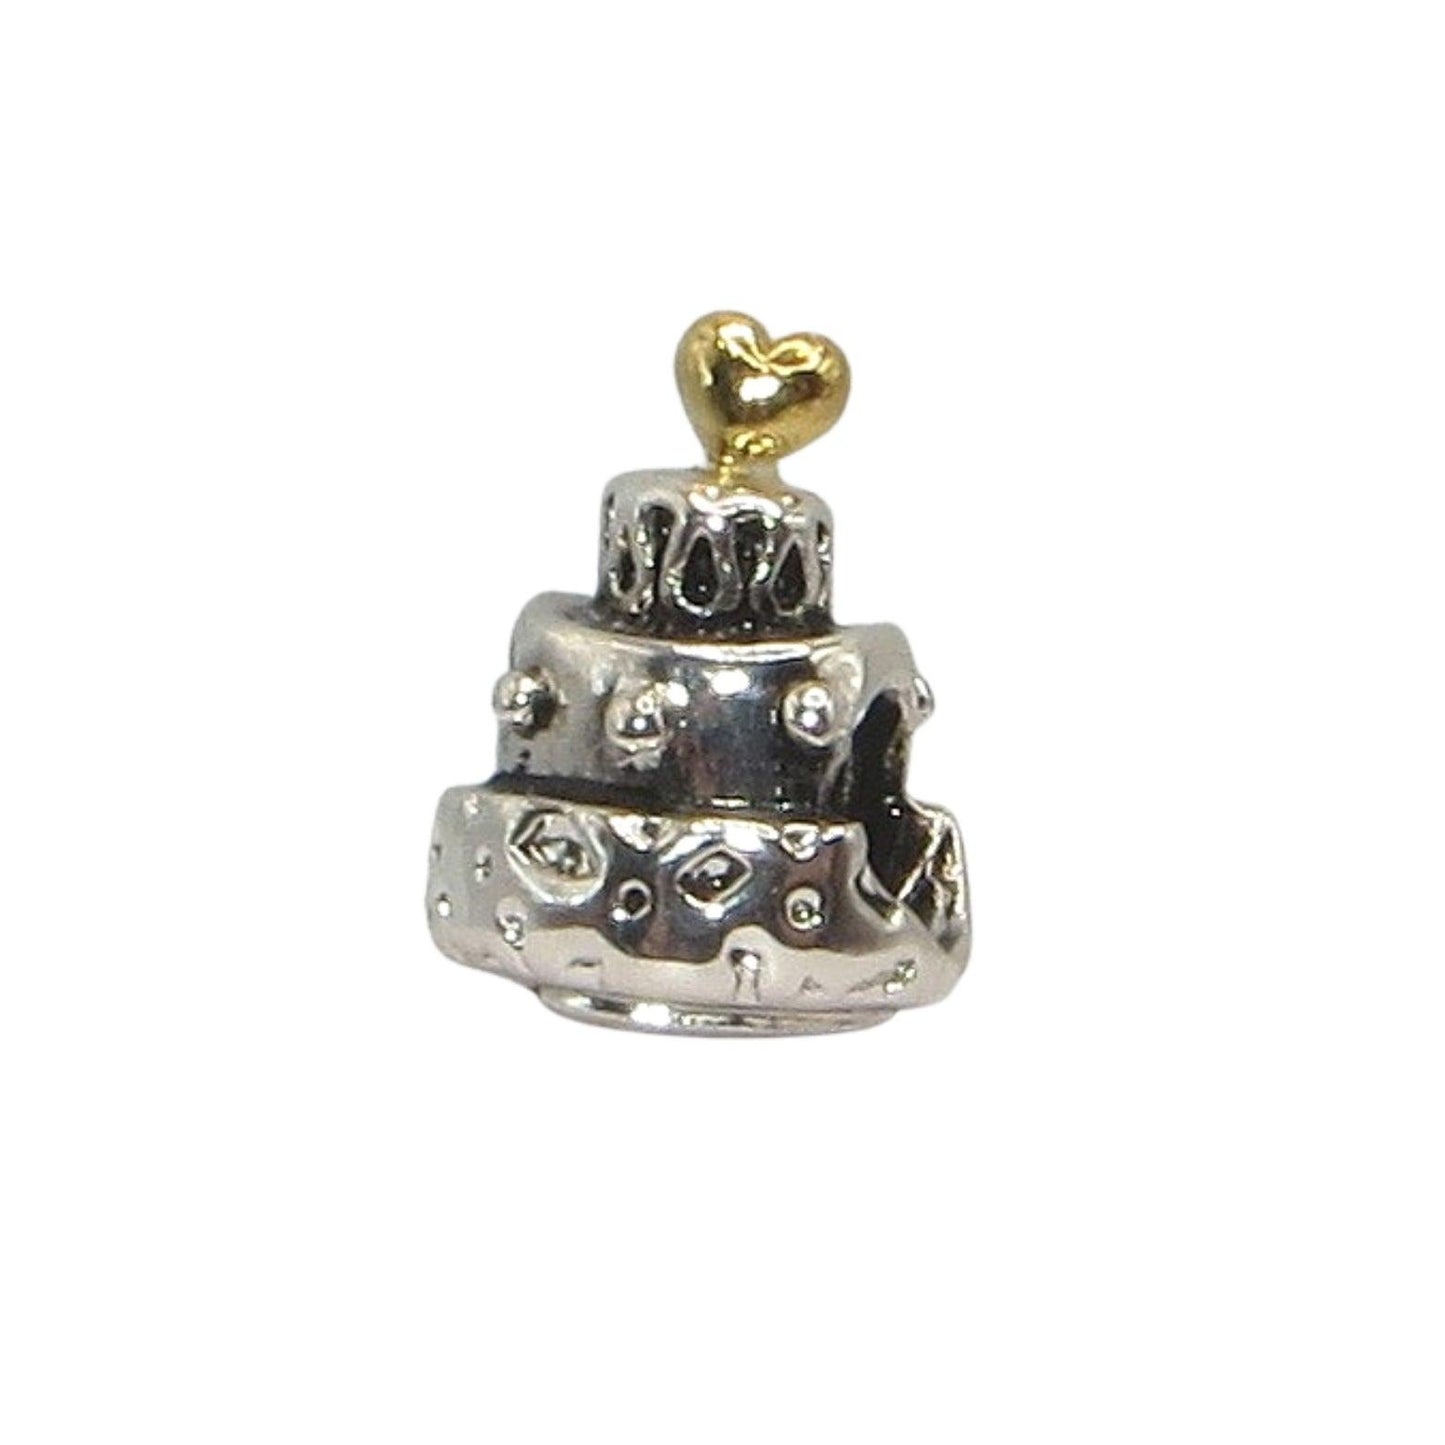 PANDORA 790347 Celebration Cake - 3-Tier Sterling Silver Cake Decorated with 14k Gold Heart - Women's - Charm